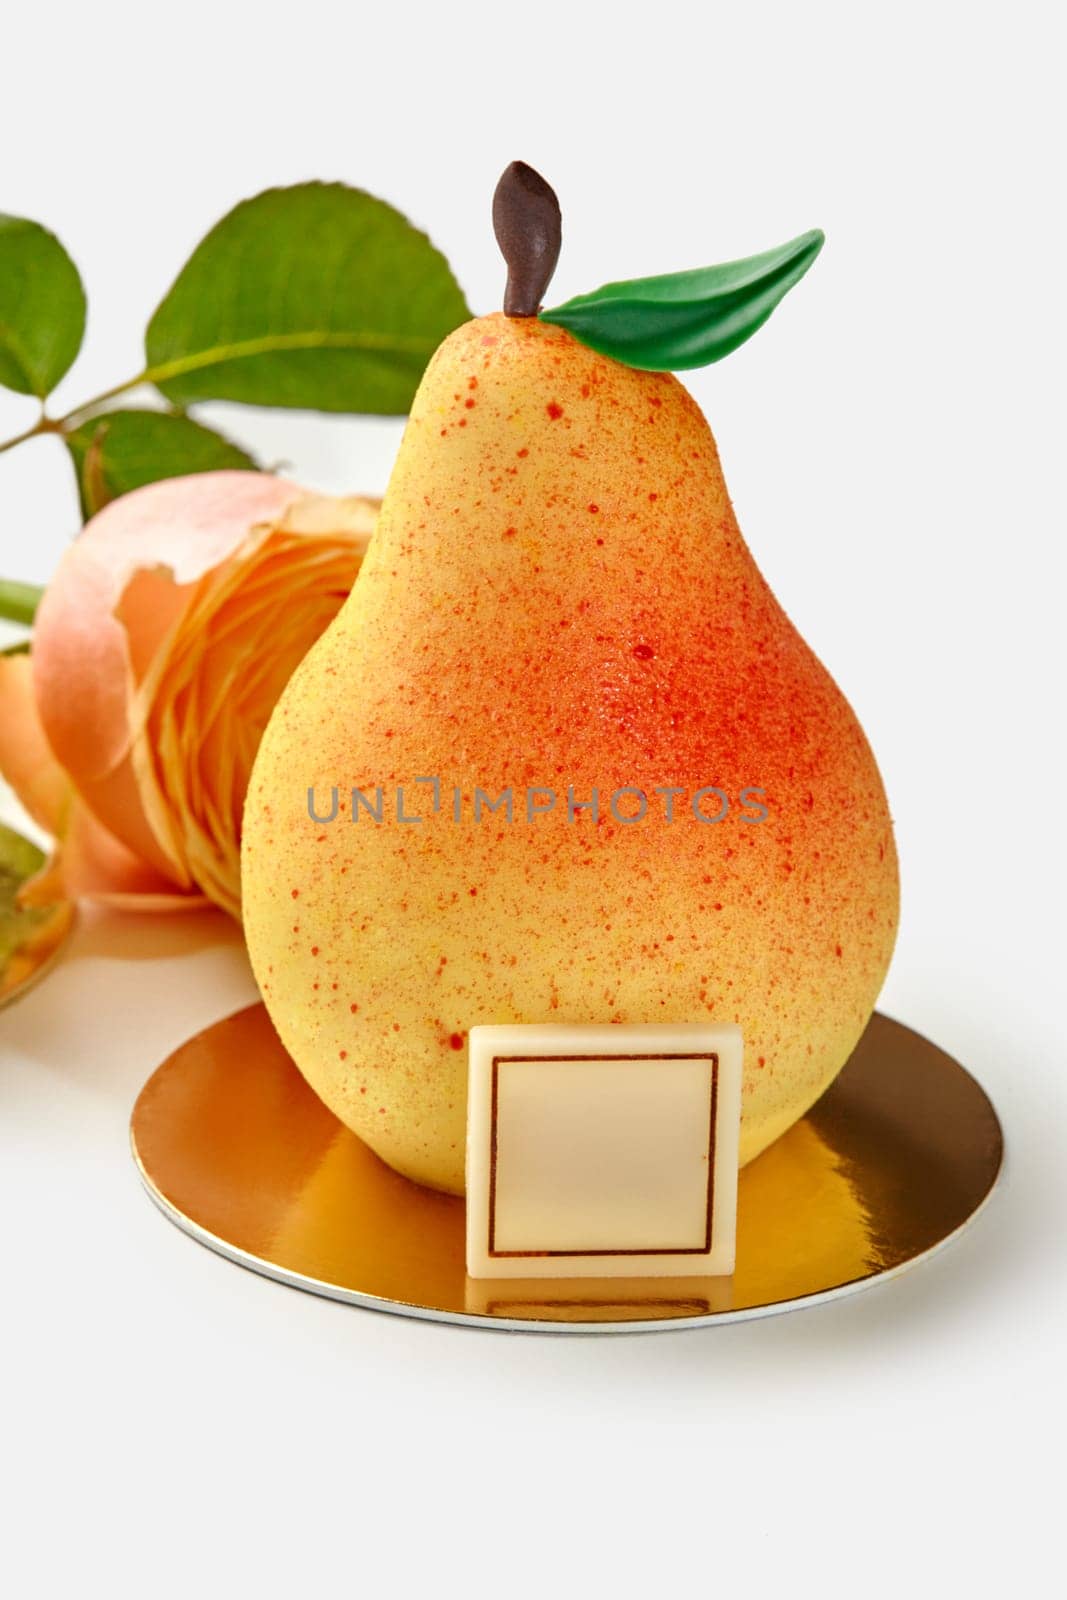 Appetizing pear-shaped mousse dessert made with fruit confit decorated with colored chocolate leaf and stem on golden serving cardboard on white background with fresh rose